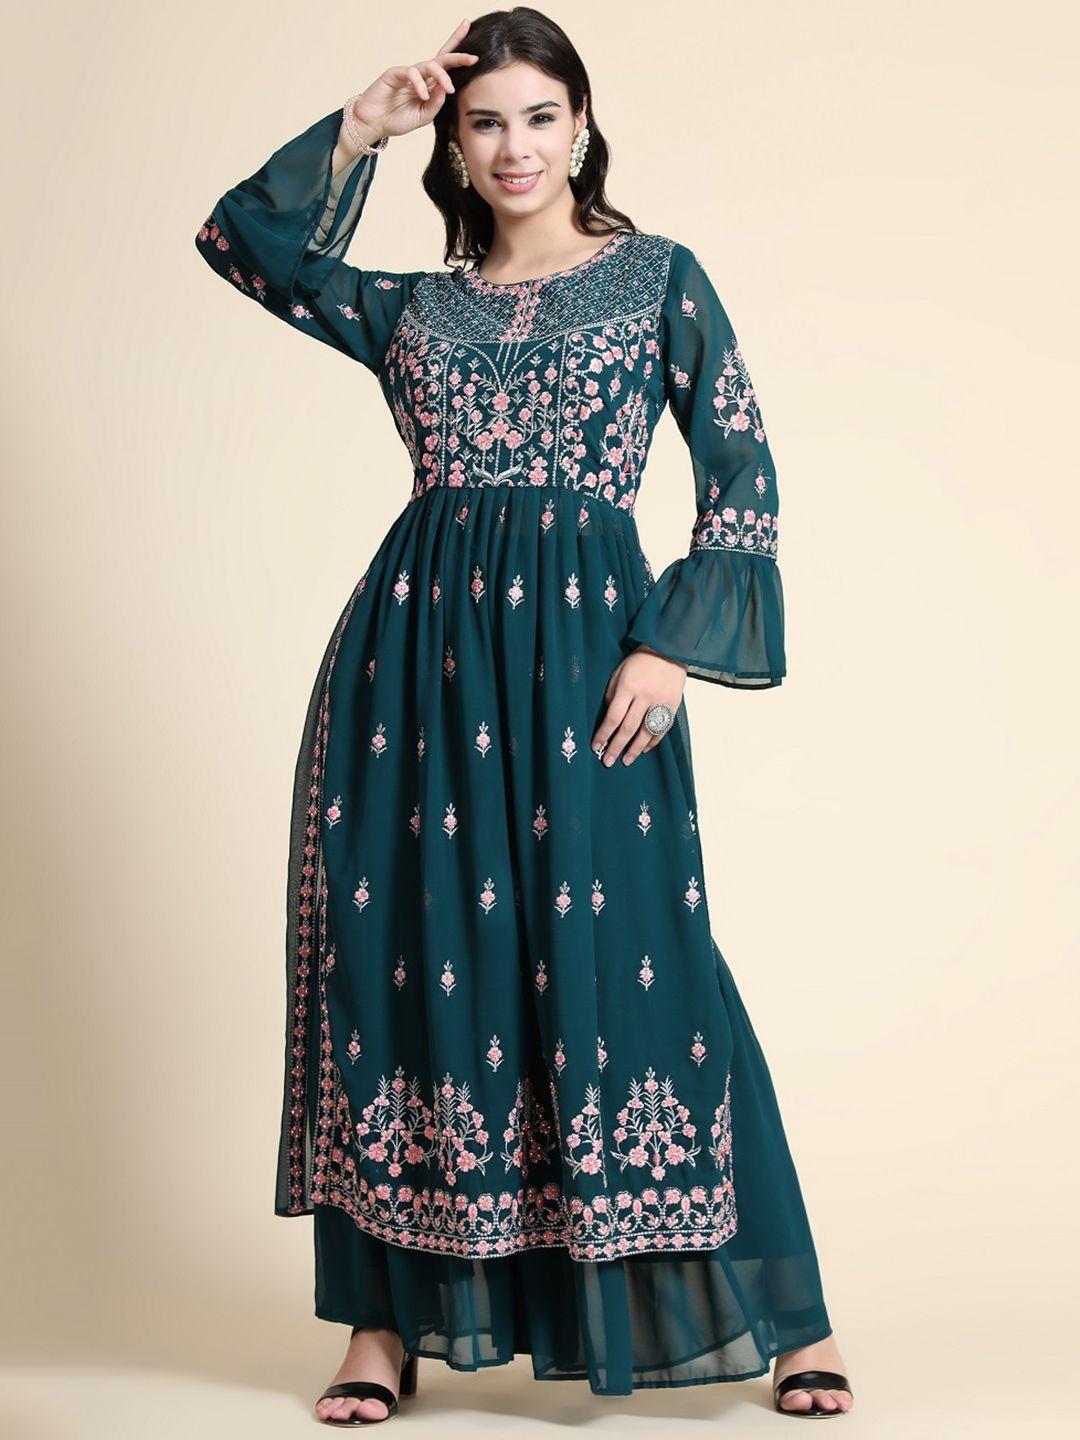 black-scissor-floral-embroidered-bell-sleeves-kurta-with-sharara